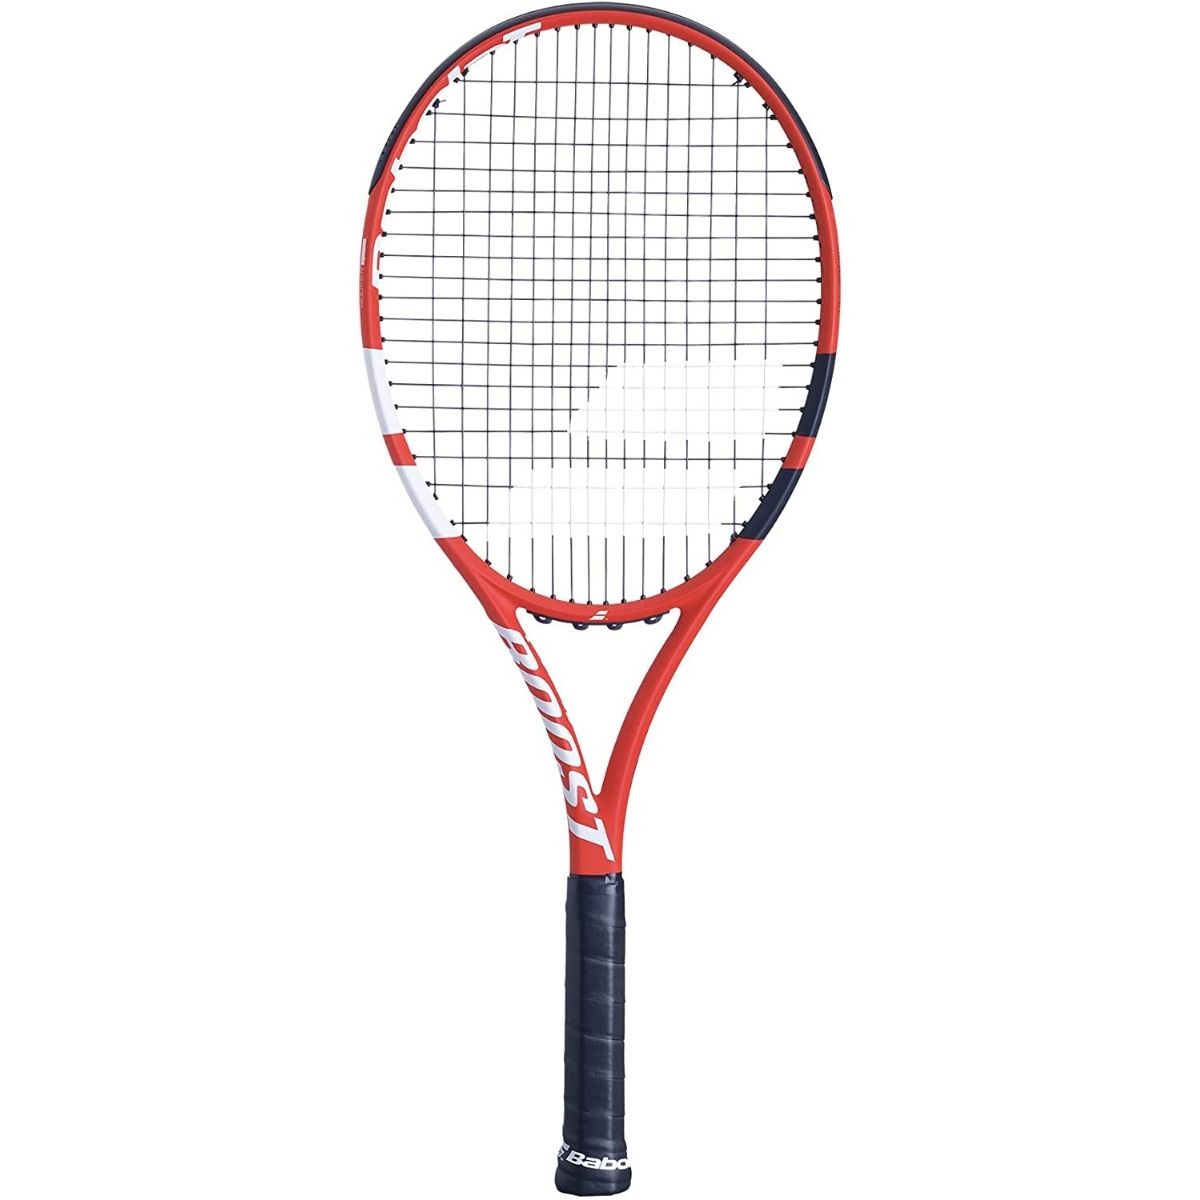 The Best Tennis Rackets for Beginners Options: Babolat Boost Strike